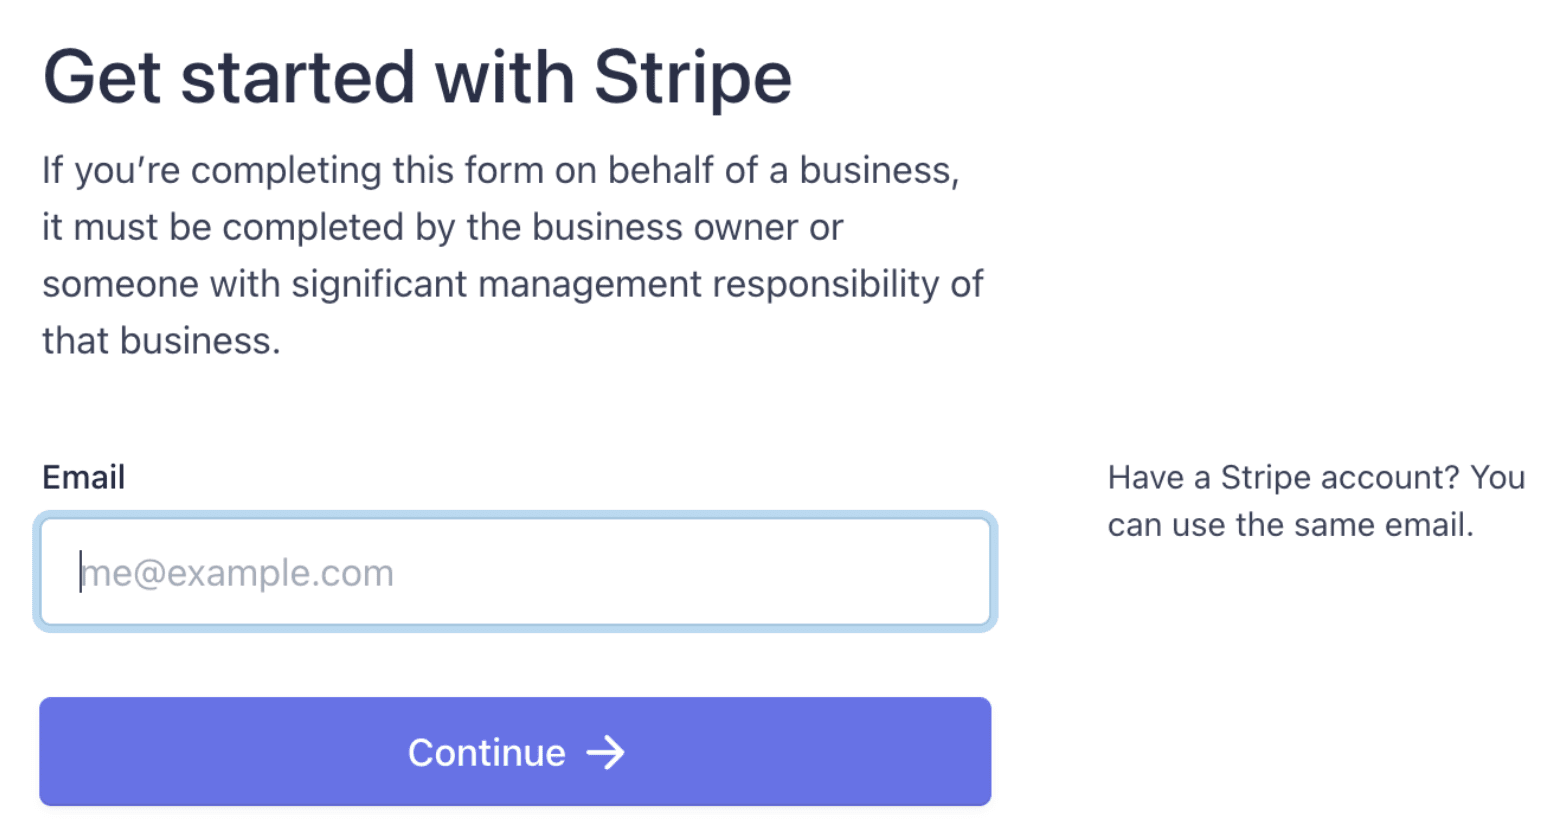 get started with Stripe login page